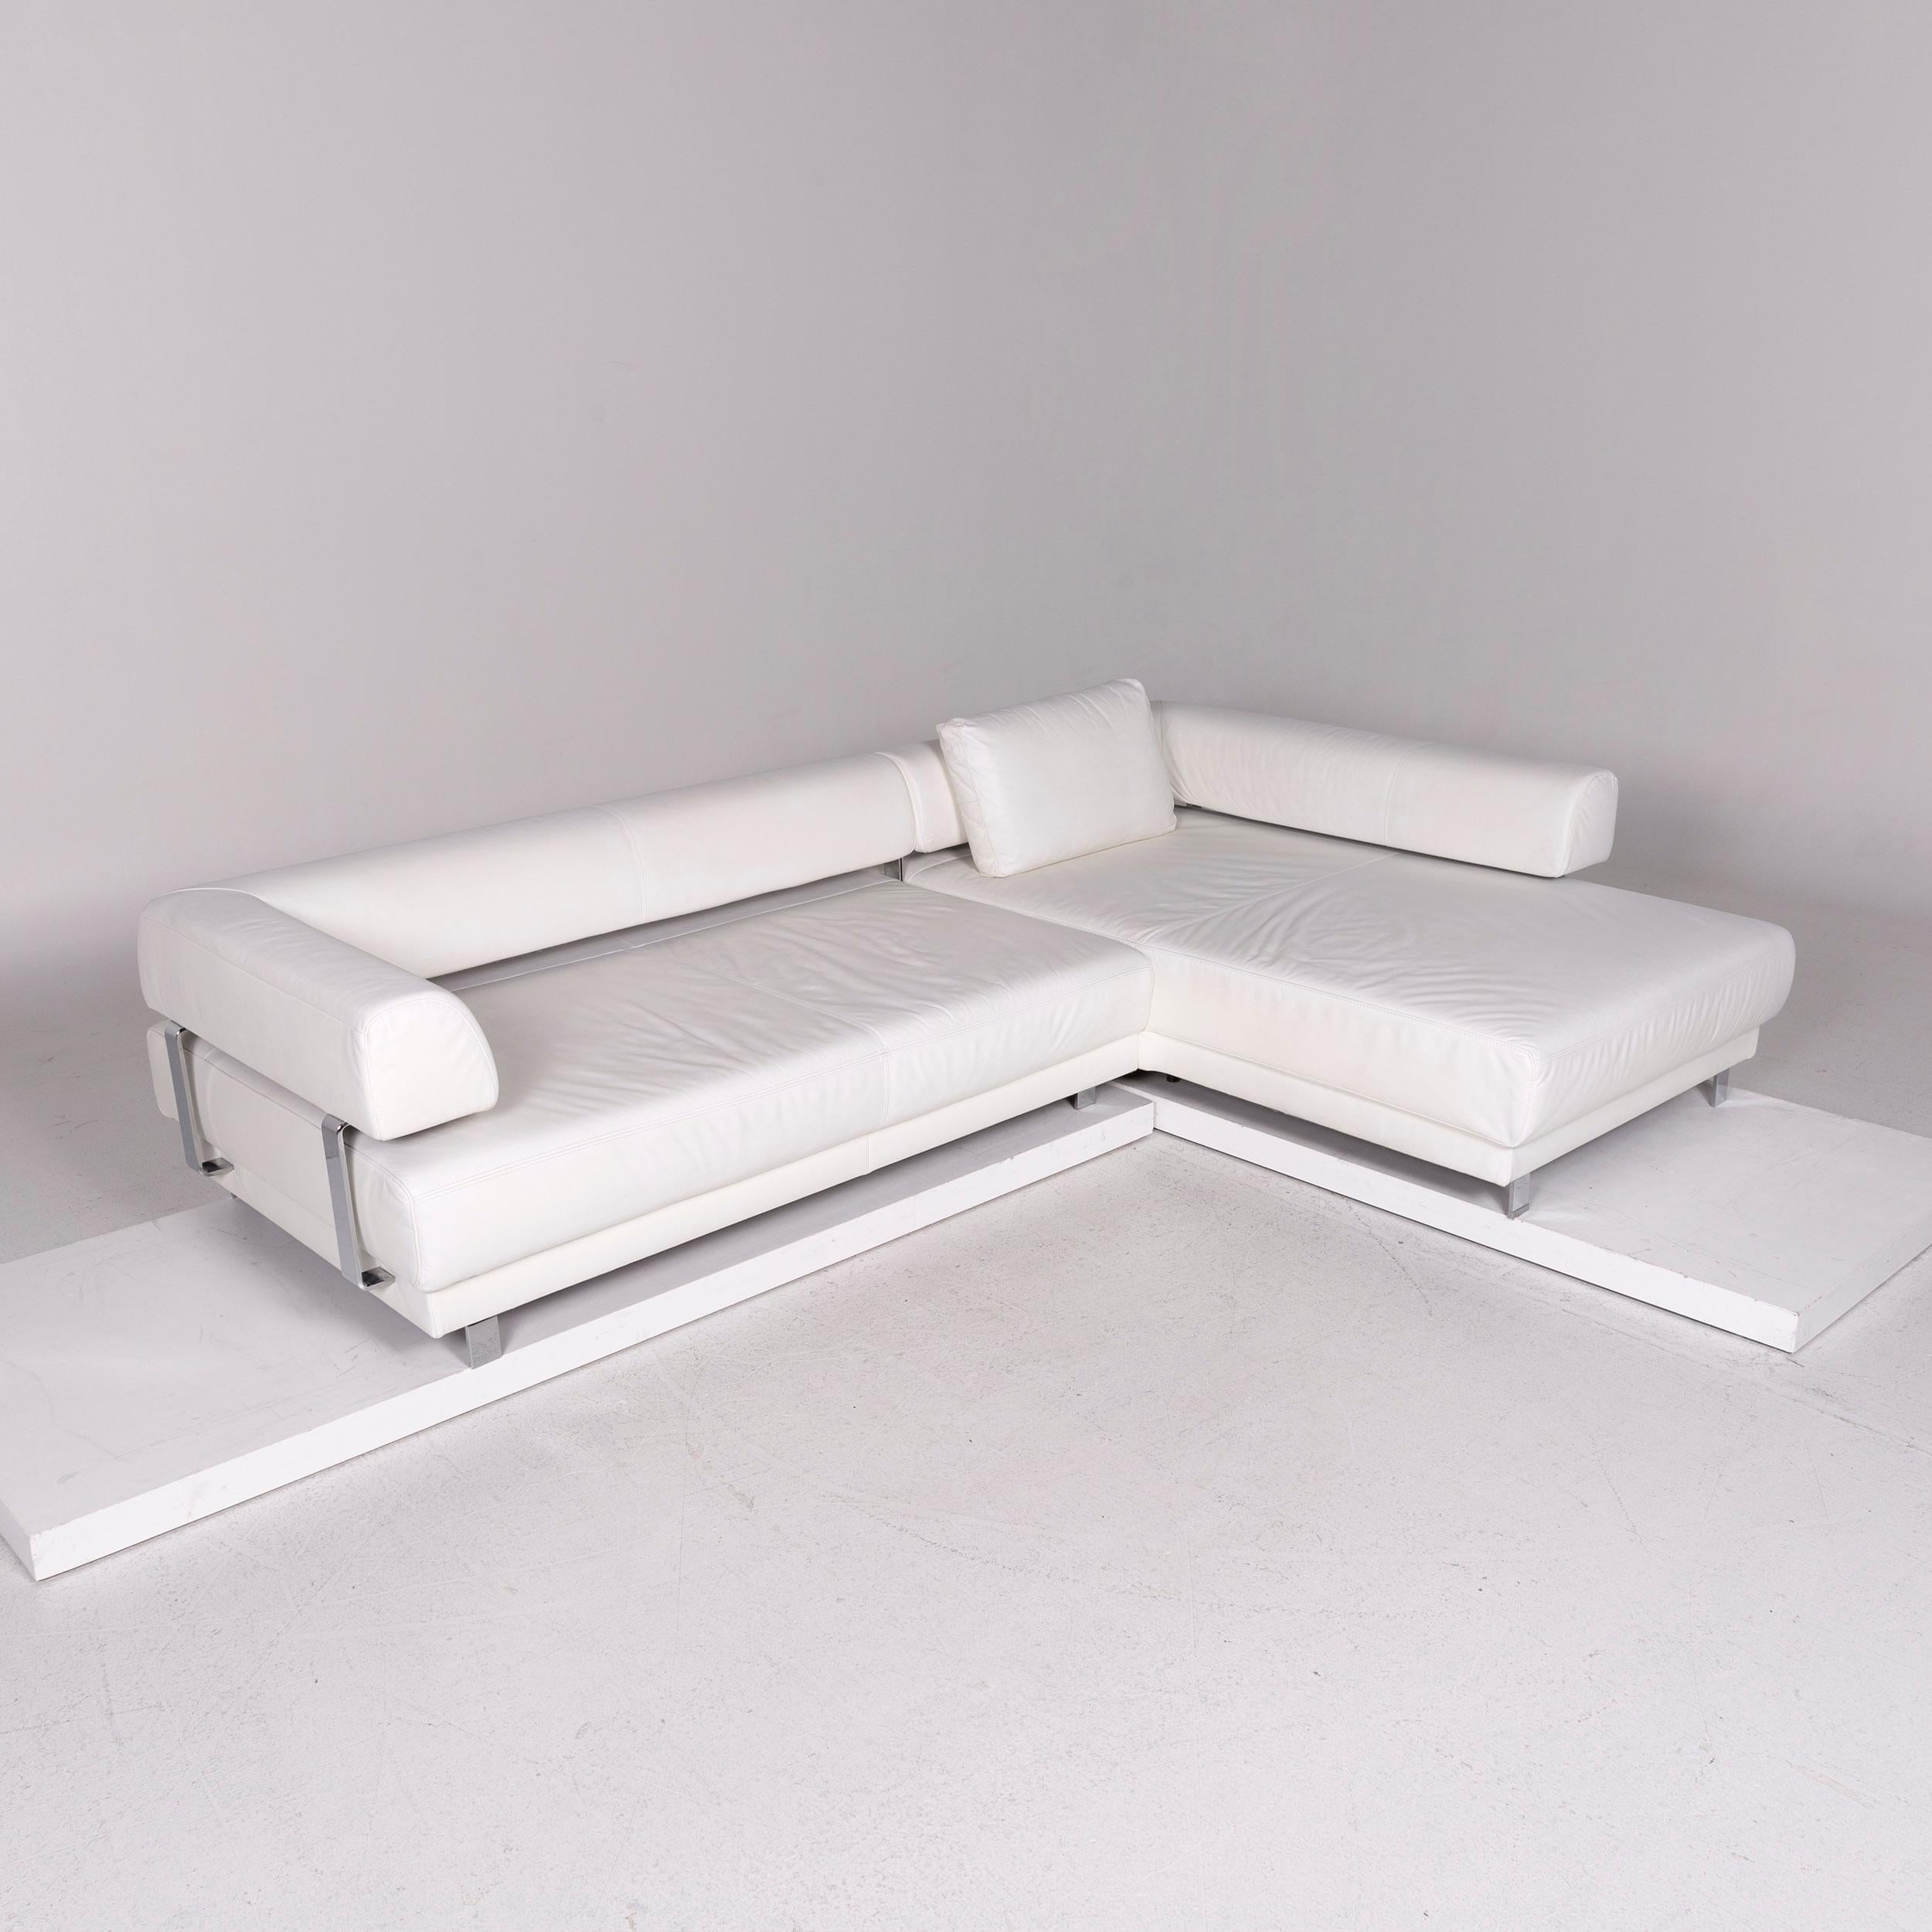 We bring to you an Ewald Schillig brand face leather corner sofa white sofa couch.
 
 Product measurements in centimeters:
 

 Depth 115
Width 300
Height 80
Seat-height 42
Rest-height 54
Seat-depth 80
Seat-width 252
Back-height 25.

   